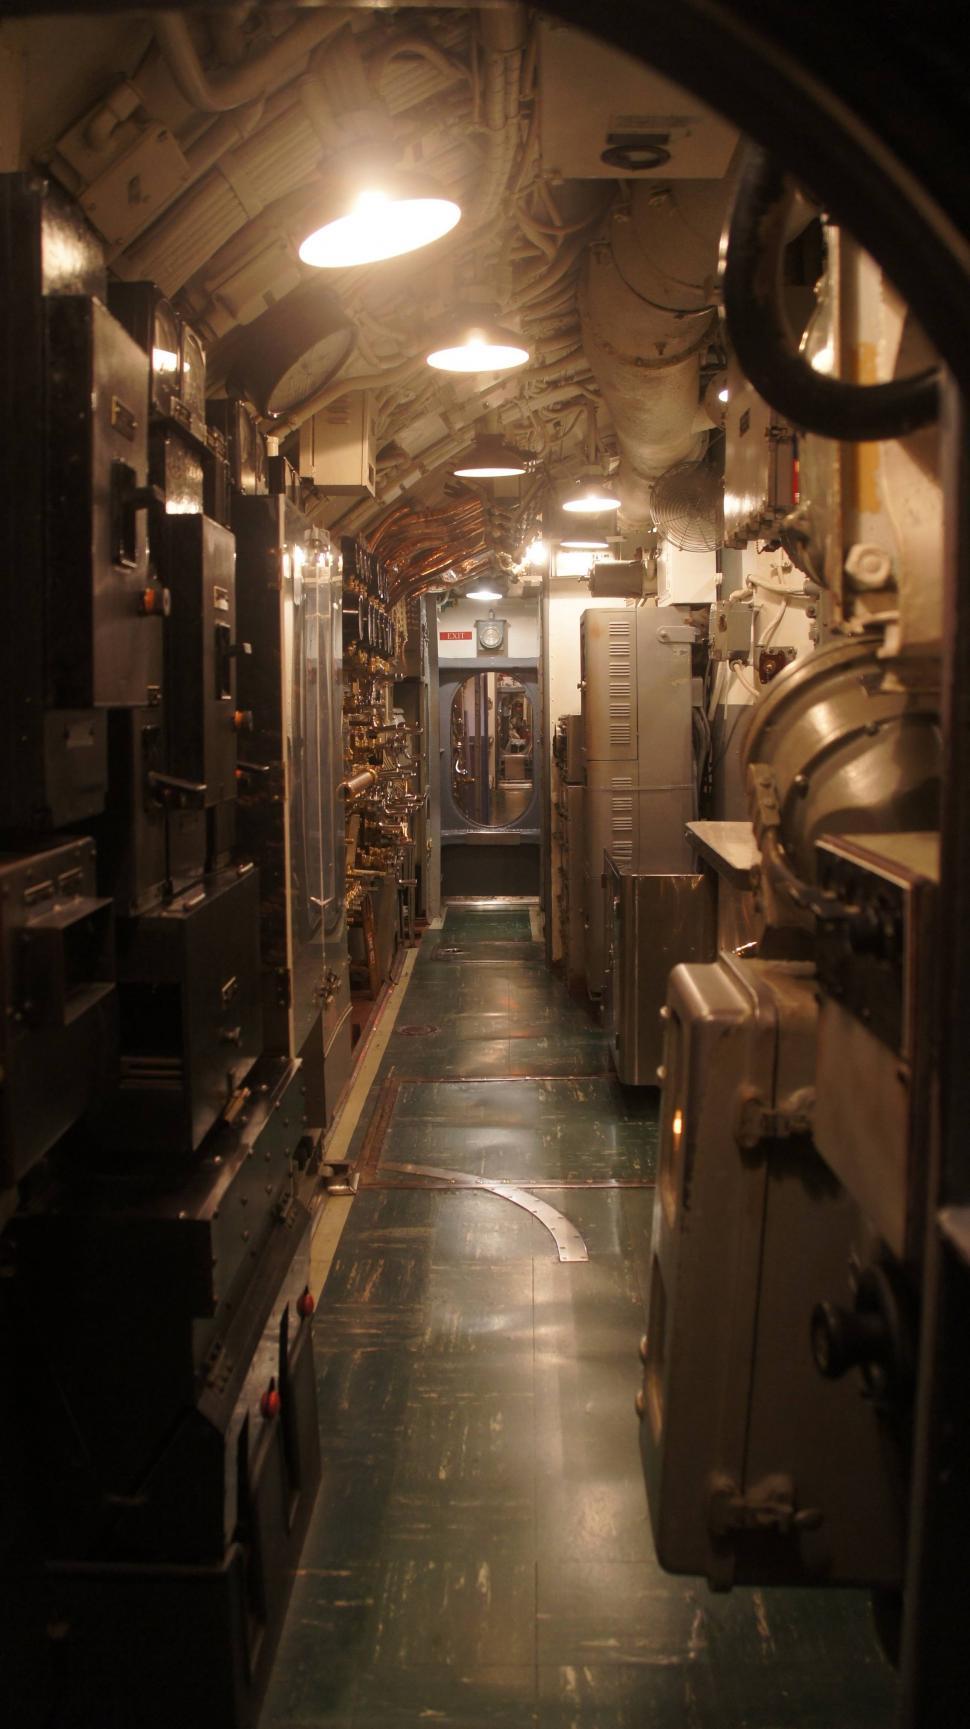 Free Image of Work Stations and Torpedoes  